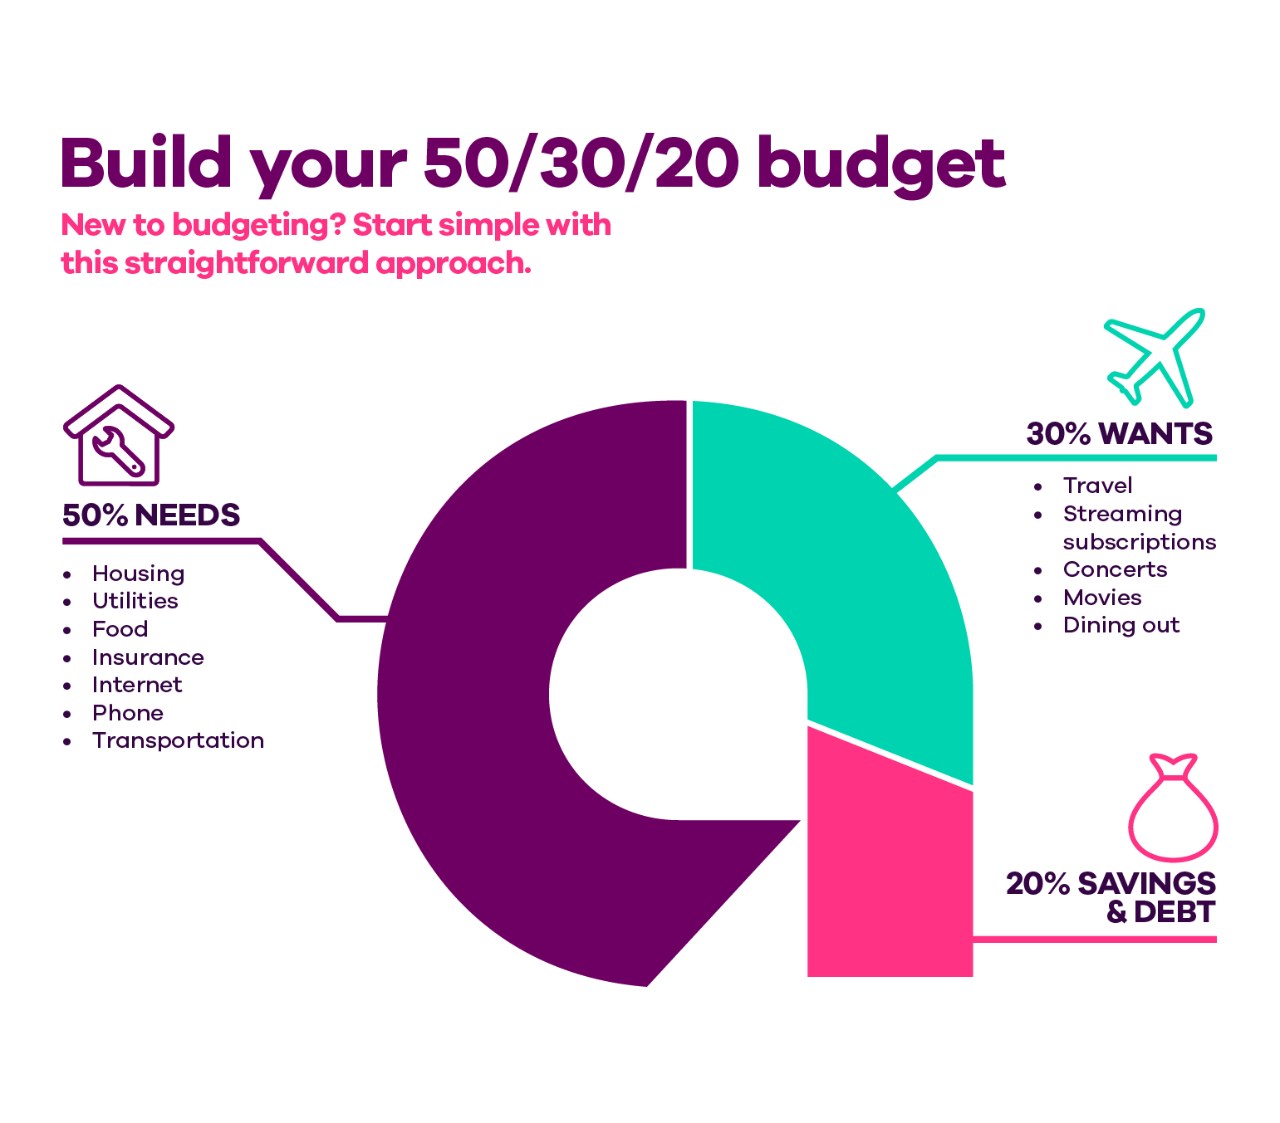 Image titled 'Build your 50/30/20 budget. New to budgeting? Start simple with this straightforward approach. There is a letter “A" representing the Ally logo as a pie chart. One portion represents 50% of needs, with the following items listed underneath: Housing, utilities, food, insurance, internet, phone, transportation. A second portion represents 30% of wants, with the following items listed underneath: Travel, streaming subscriptions, concerts, movies, dining out. The final portion represents 20% of savings and debt.